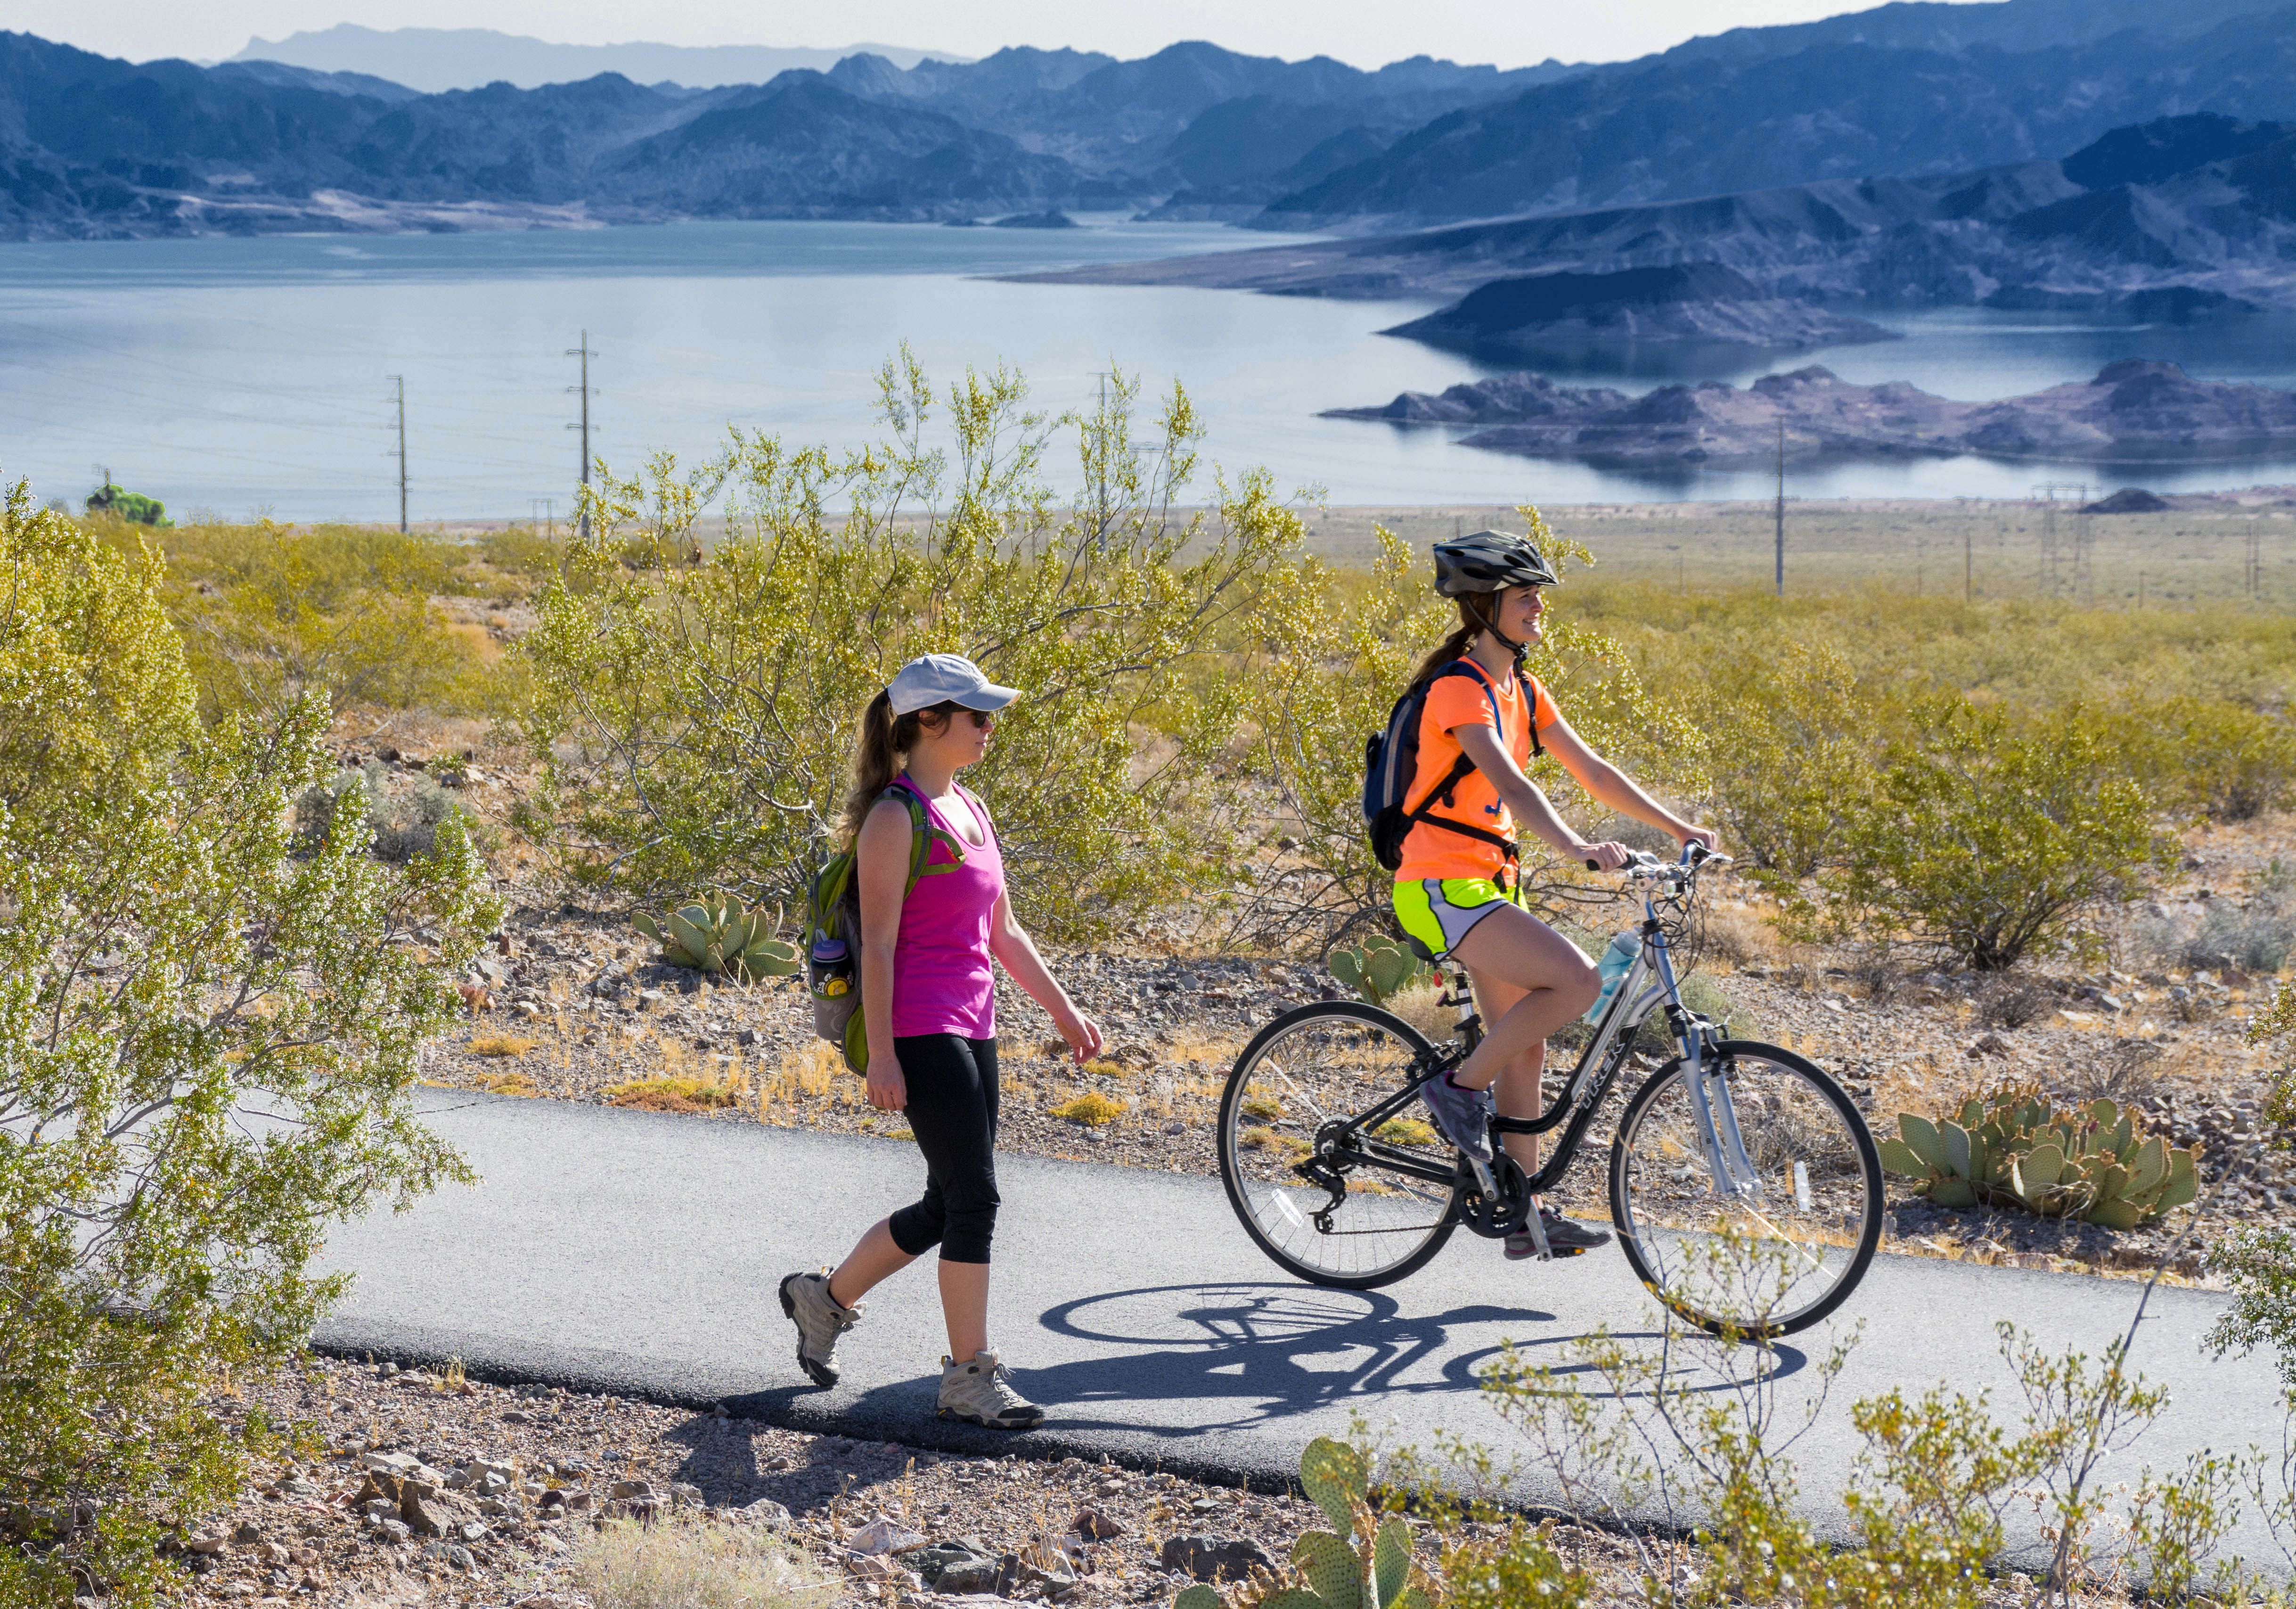 Cycling and Walking on River Mountains Loop Trail in Nevada, USA